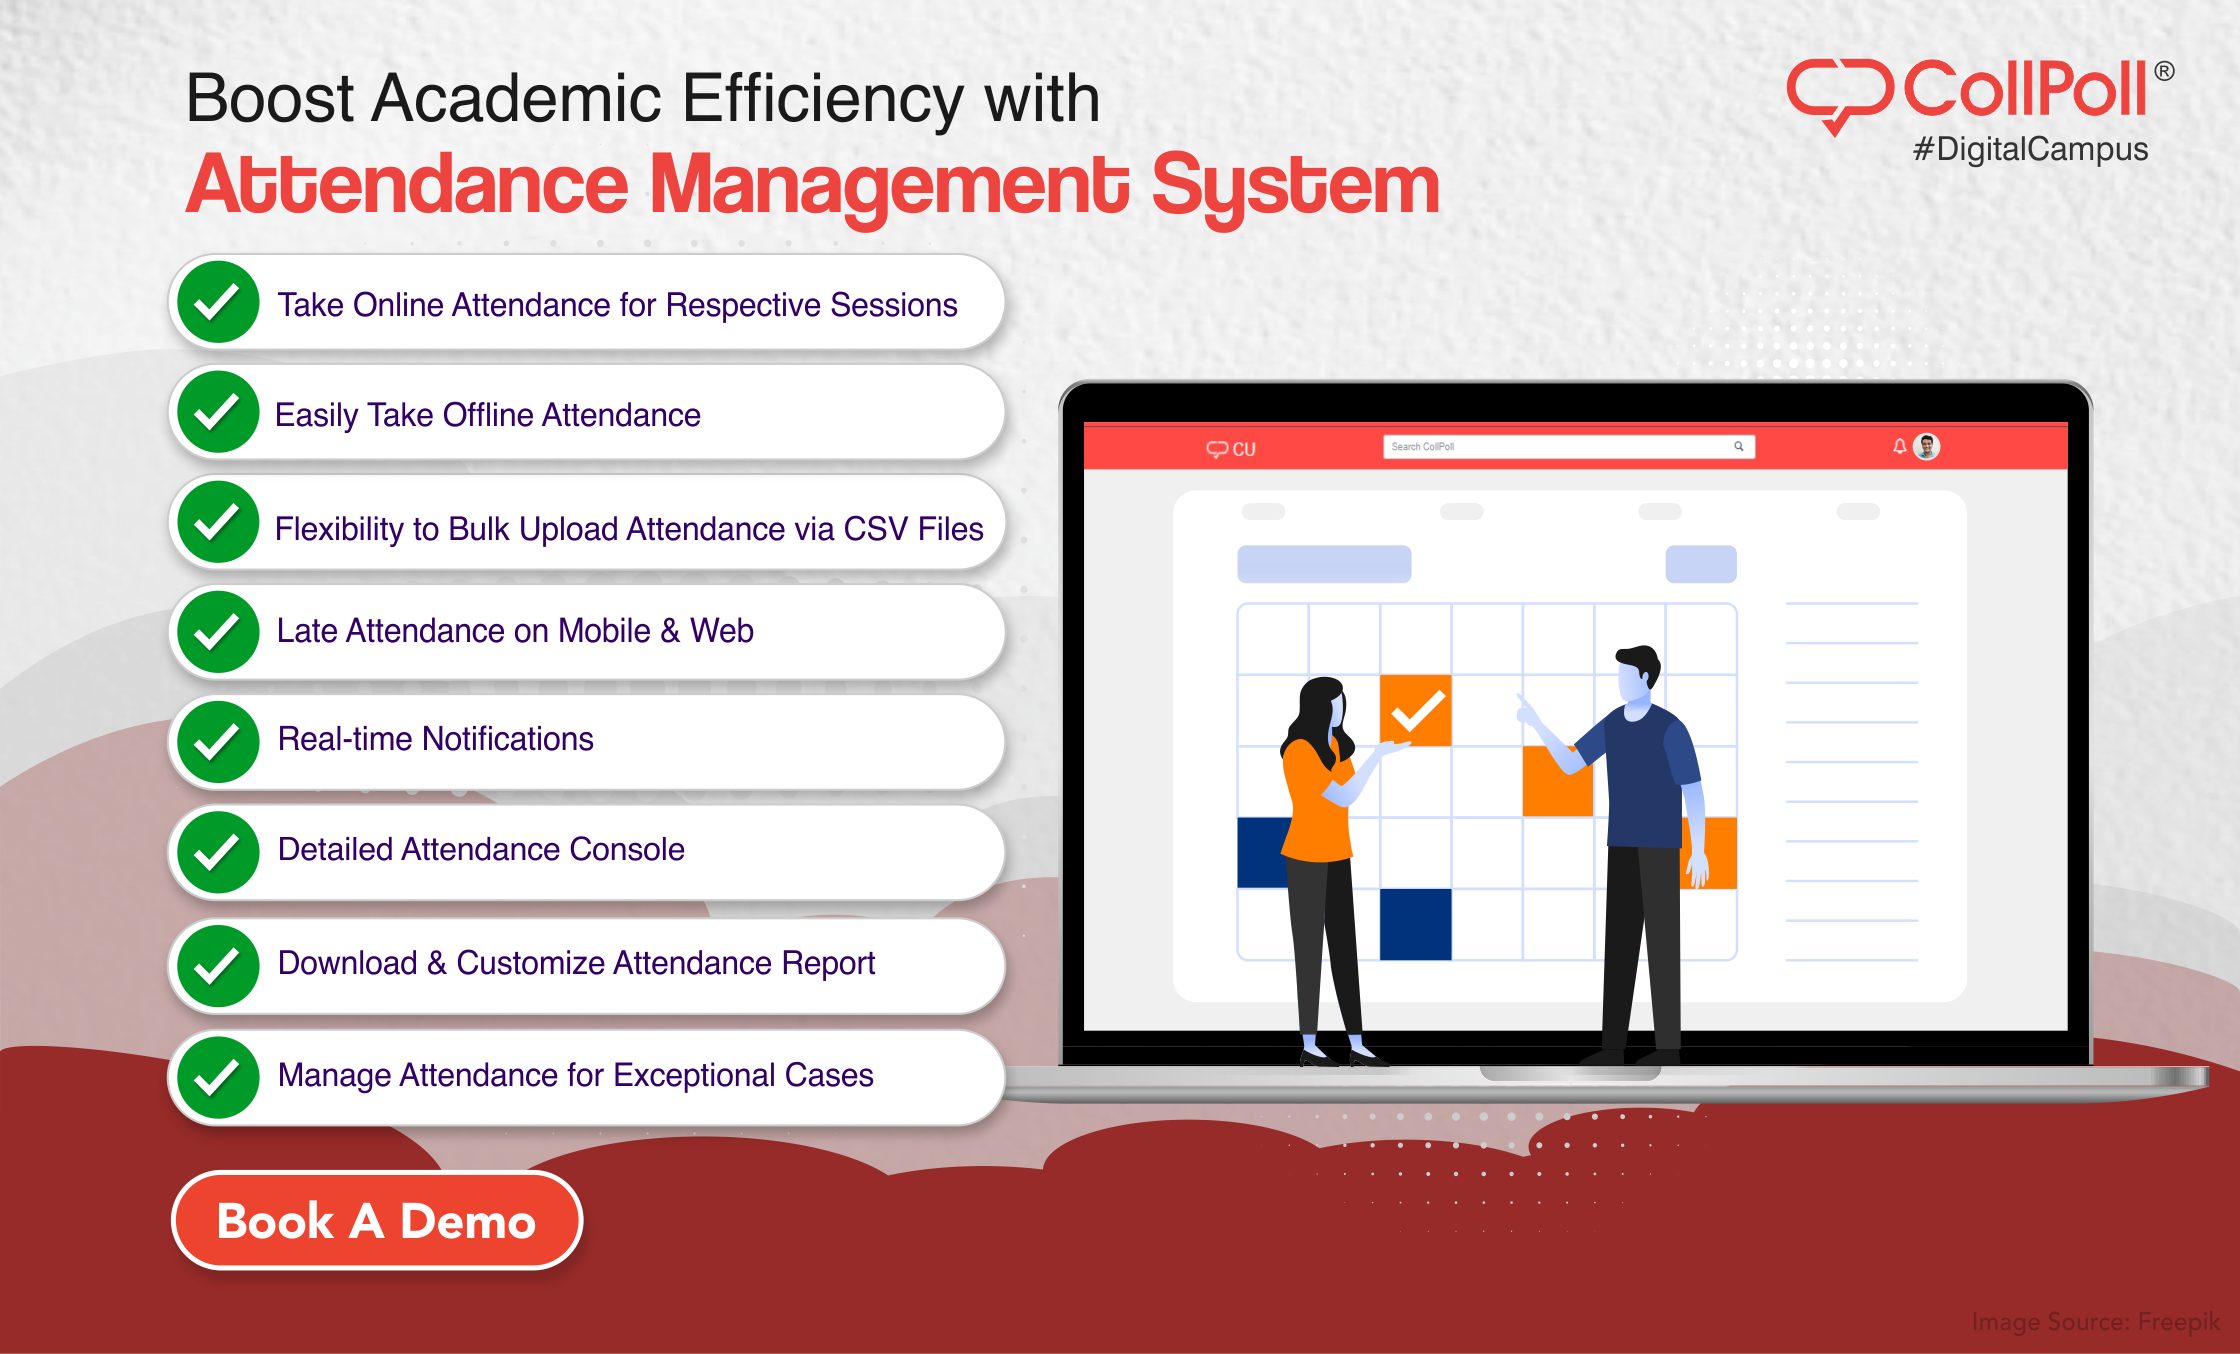 Features of CollPoll’s Attendance Management System